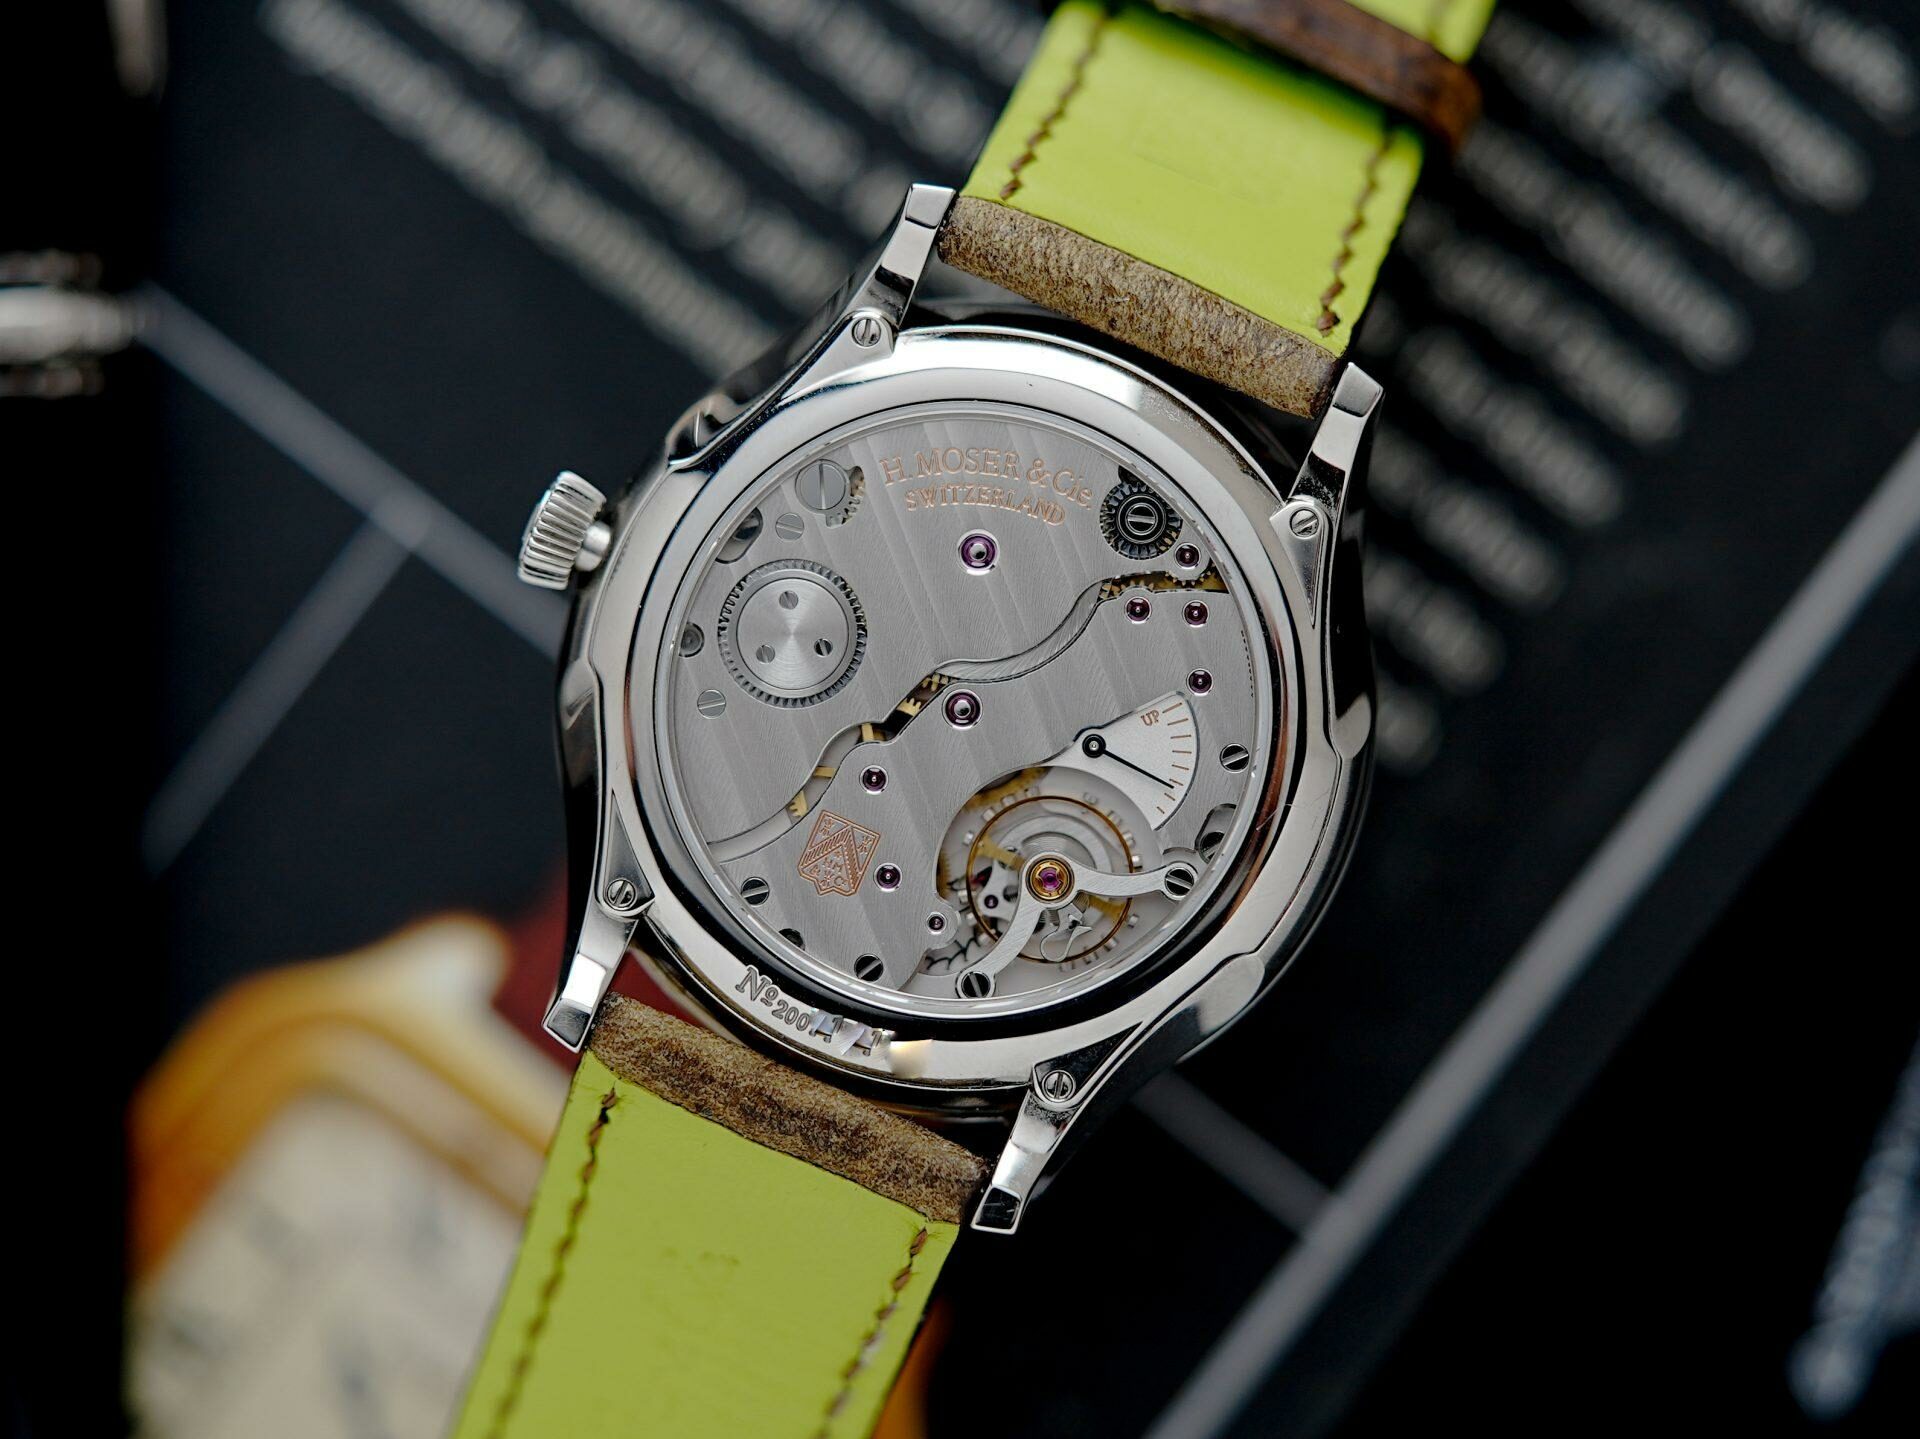 Back side and strap for the H.Moser & Cie. Venturer Small Seconds Xl watch.